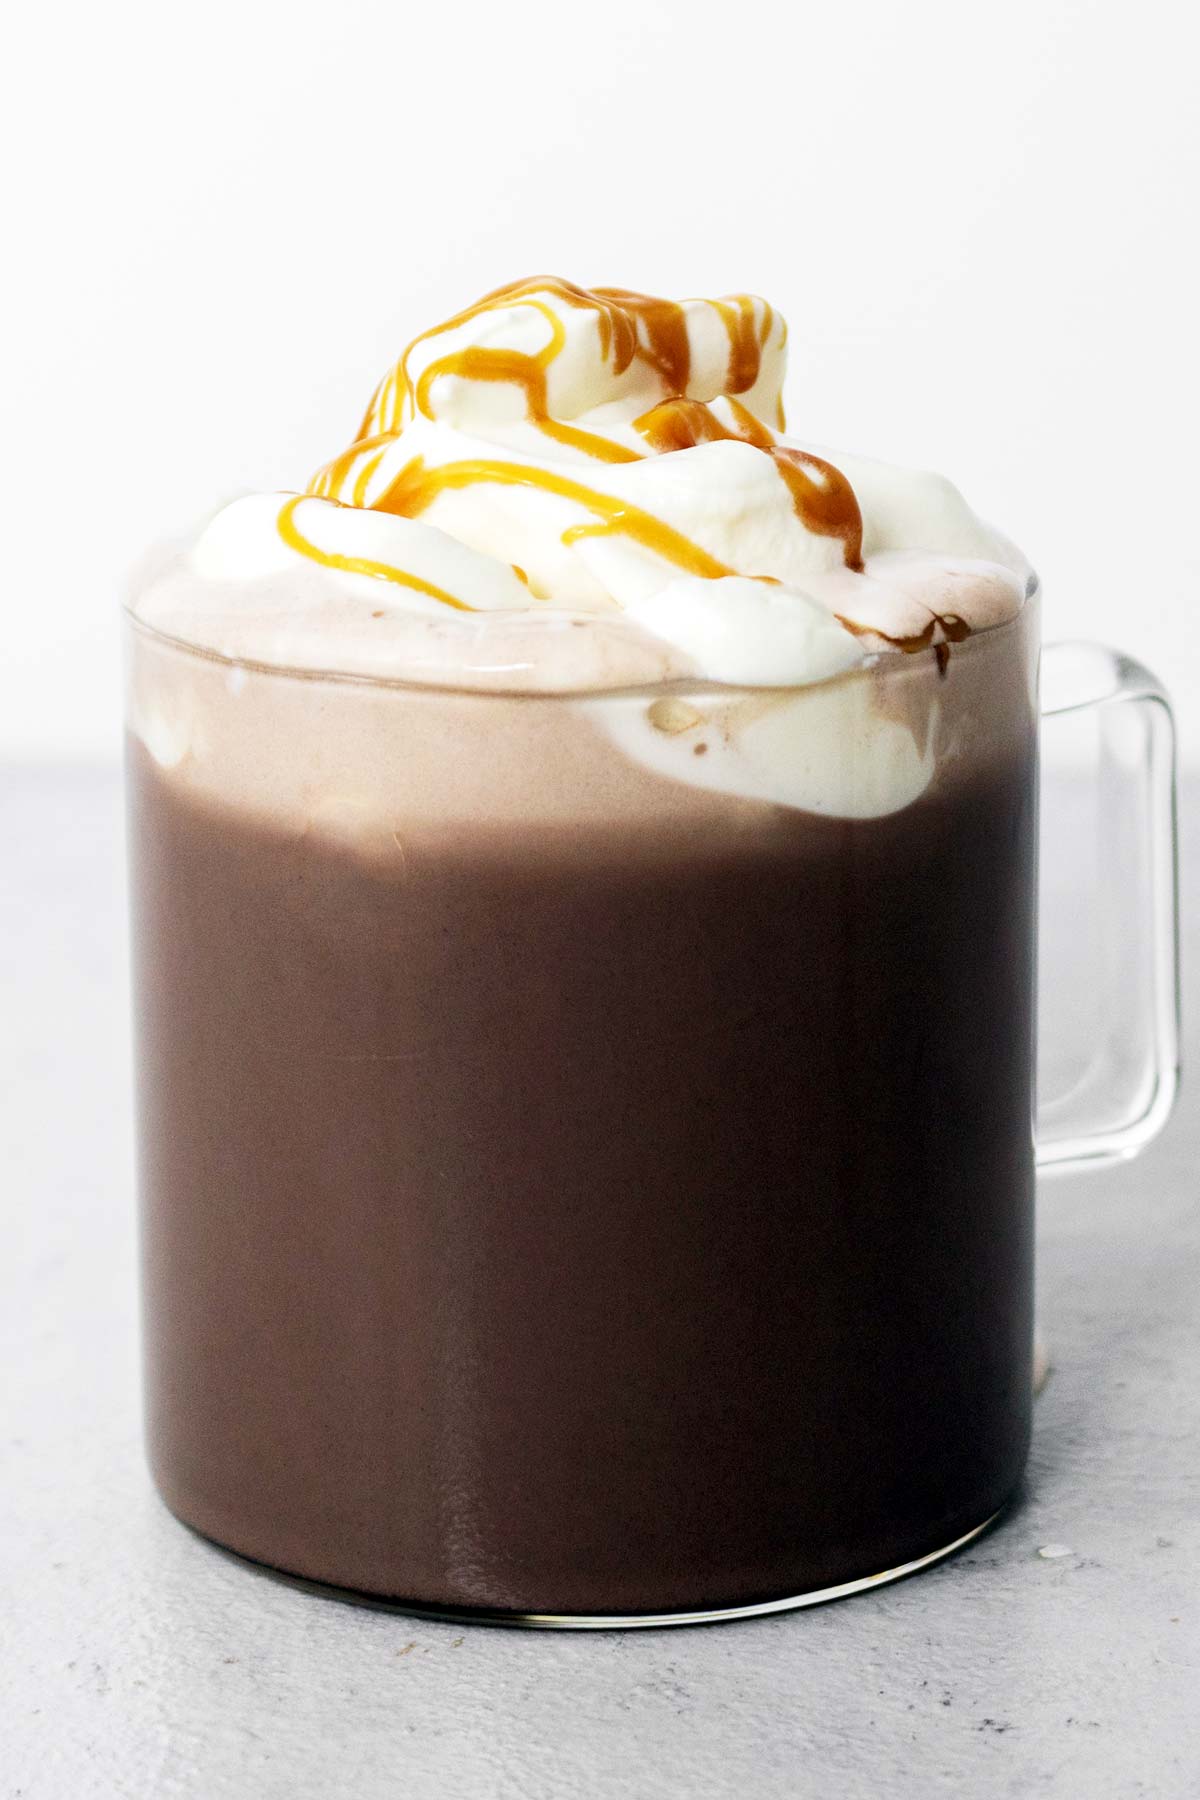 Salted caramel hot chocolate in a mug with whipped cream.